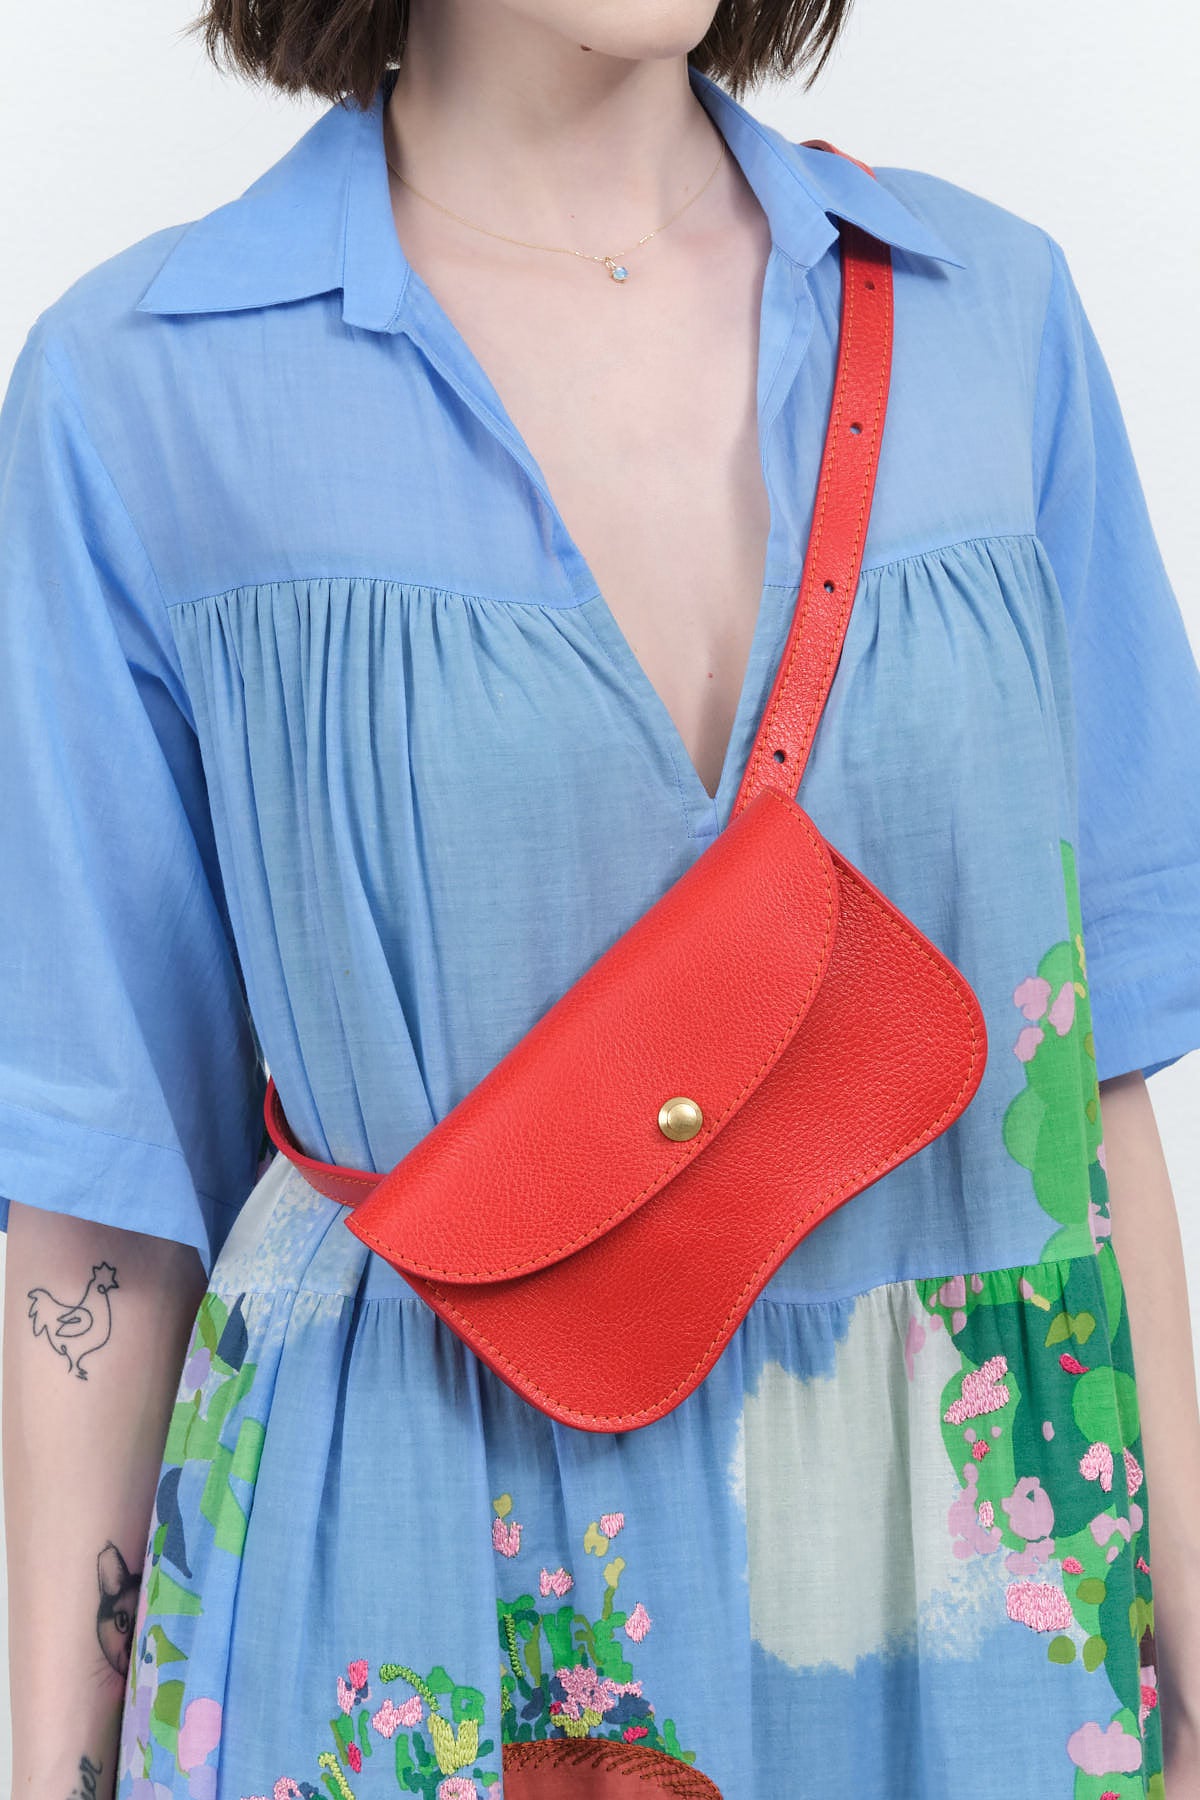 Faba Bag by Lindquist in Persimmon